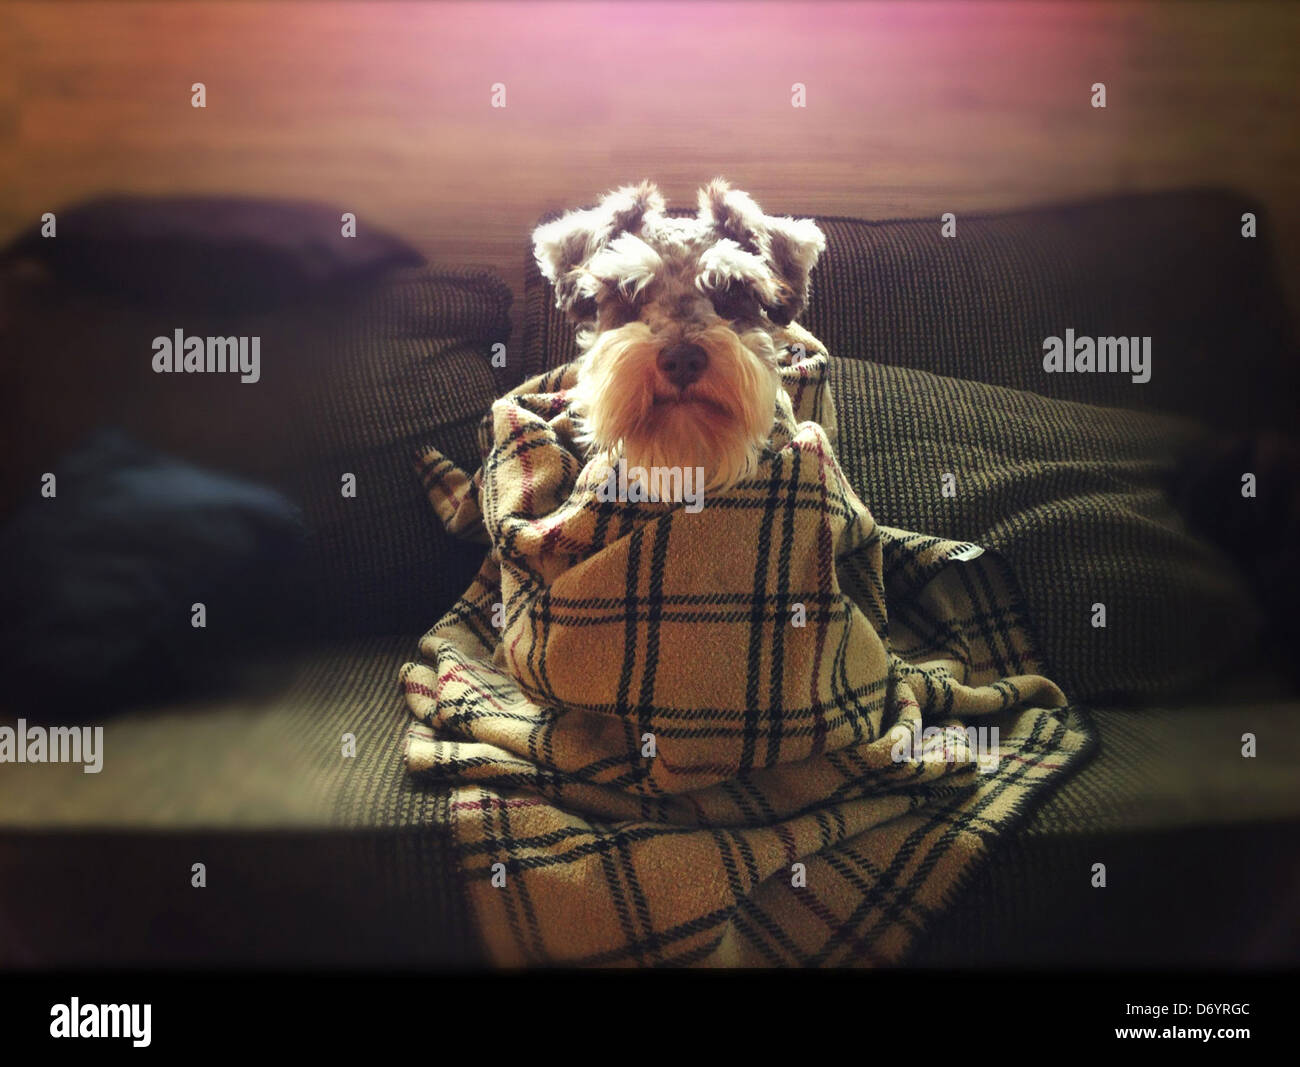 Dog wrapped in blanket on sofa Stock Photo